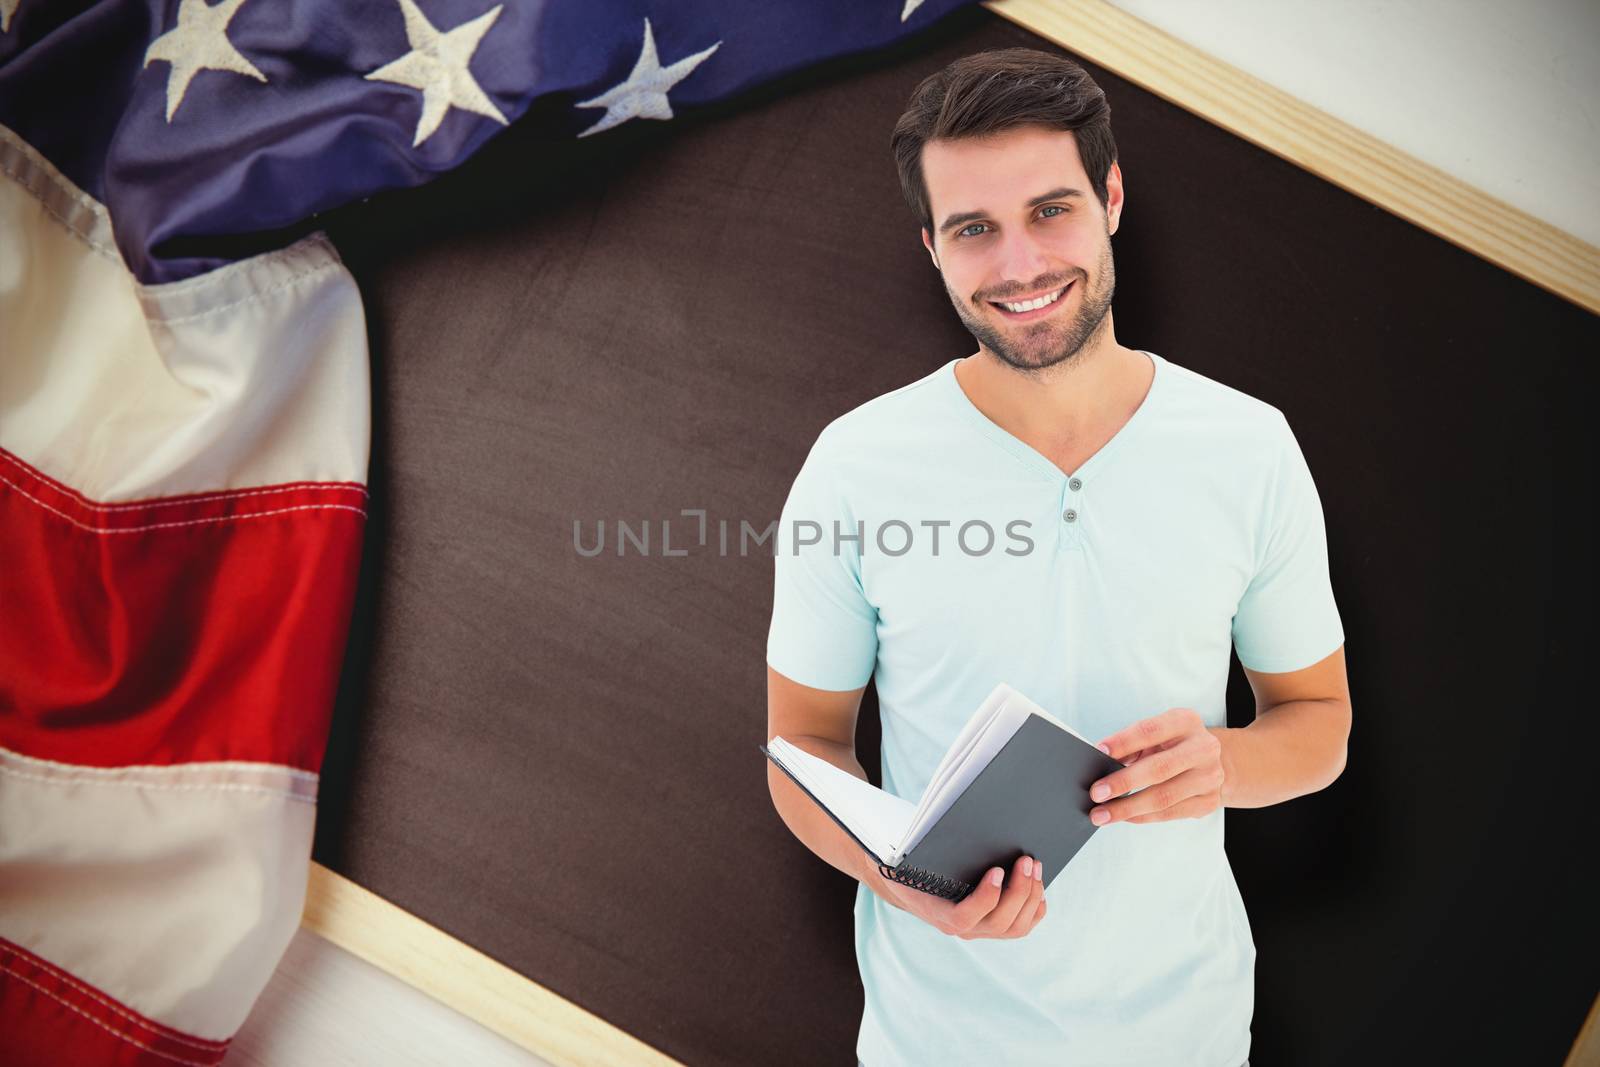 Student holding book against american flag on chalkboard